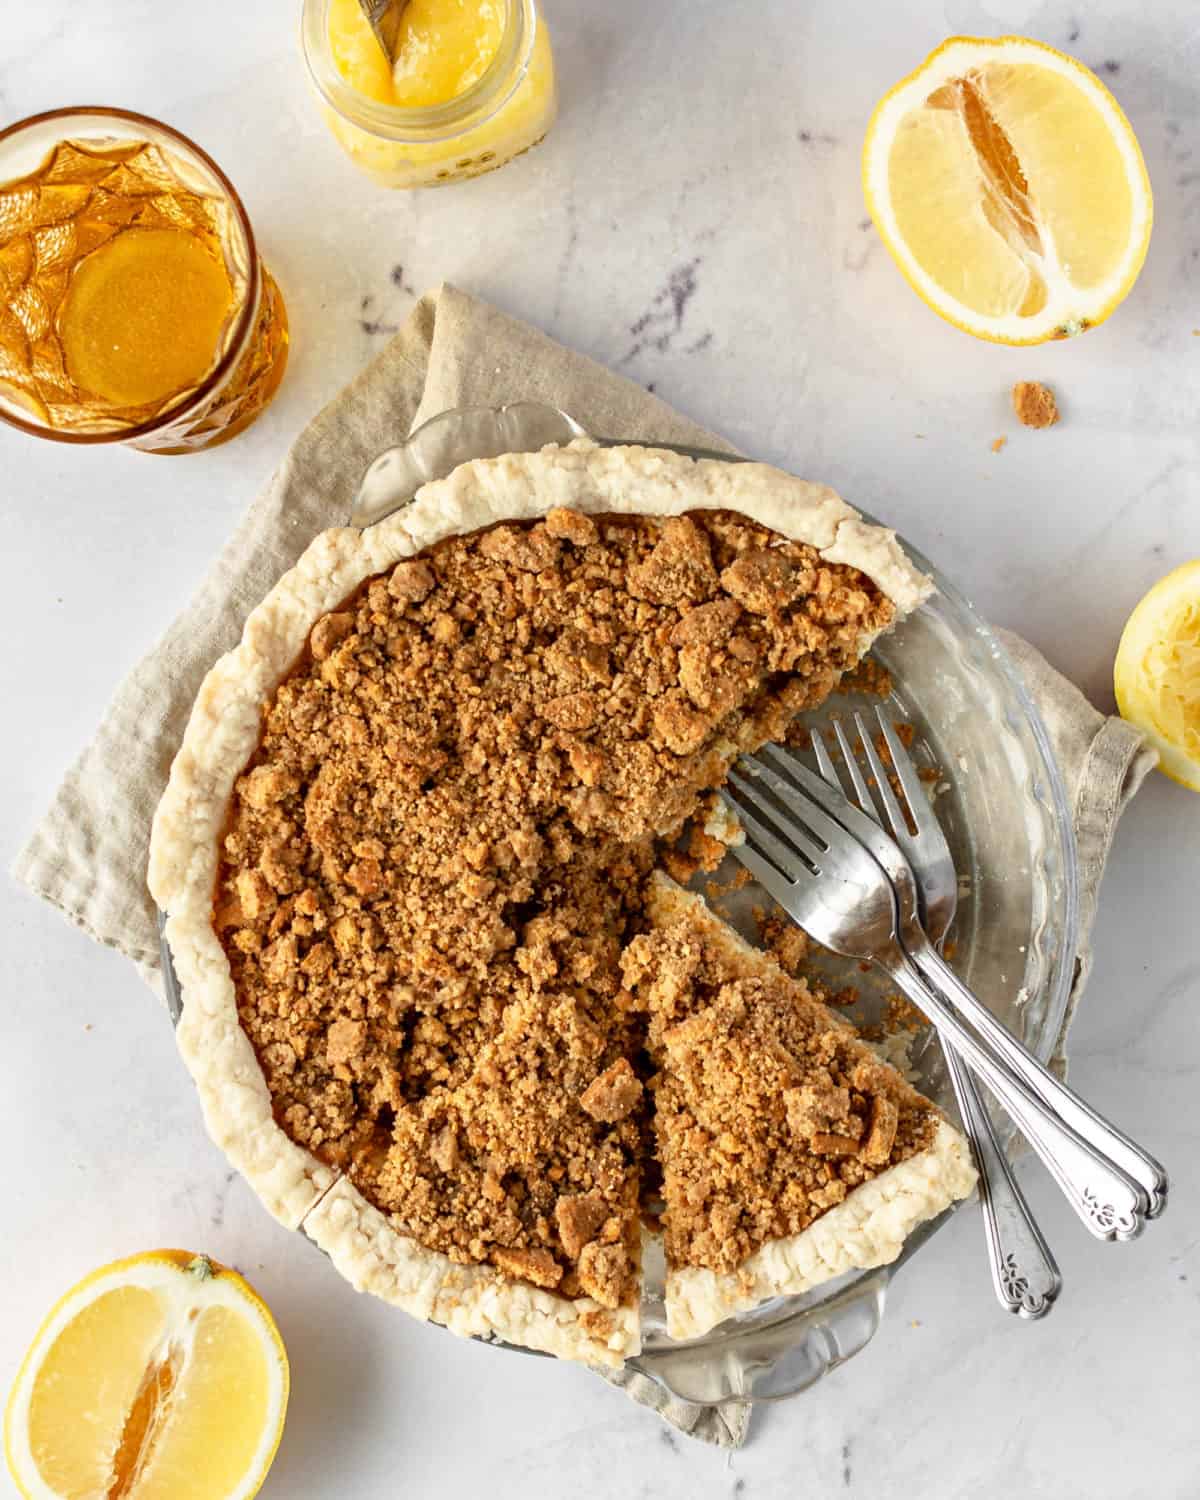 A lemon crunch pie in its dish with a slice cut out.